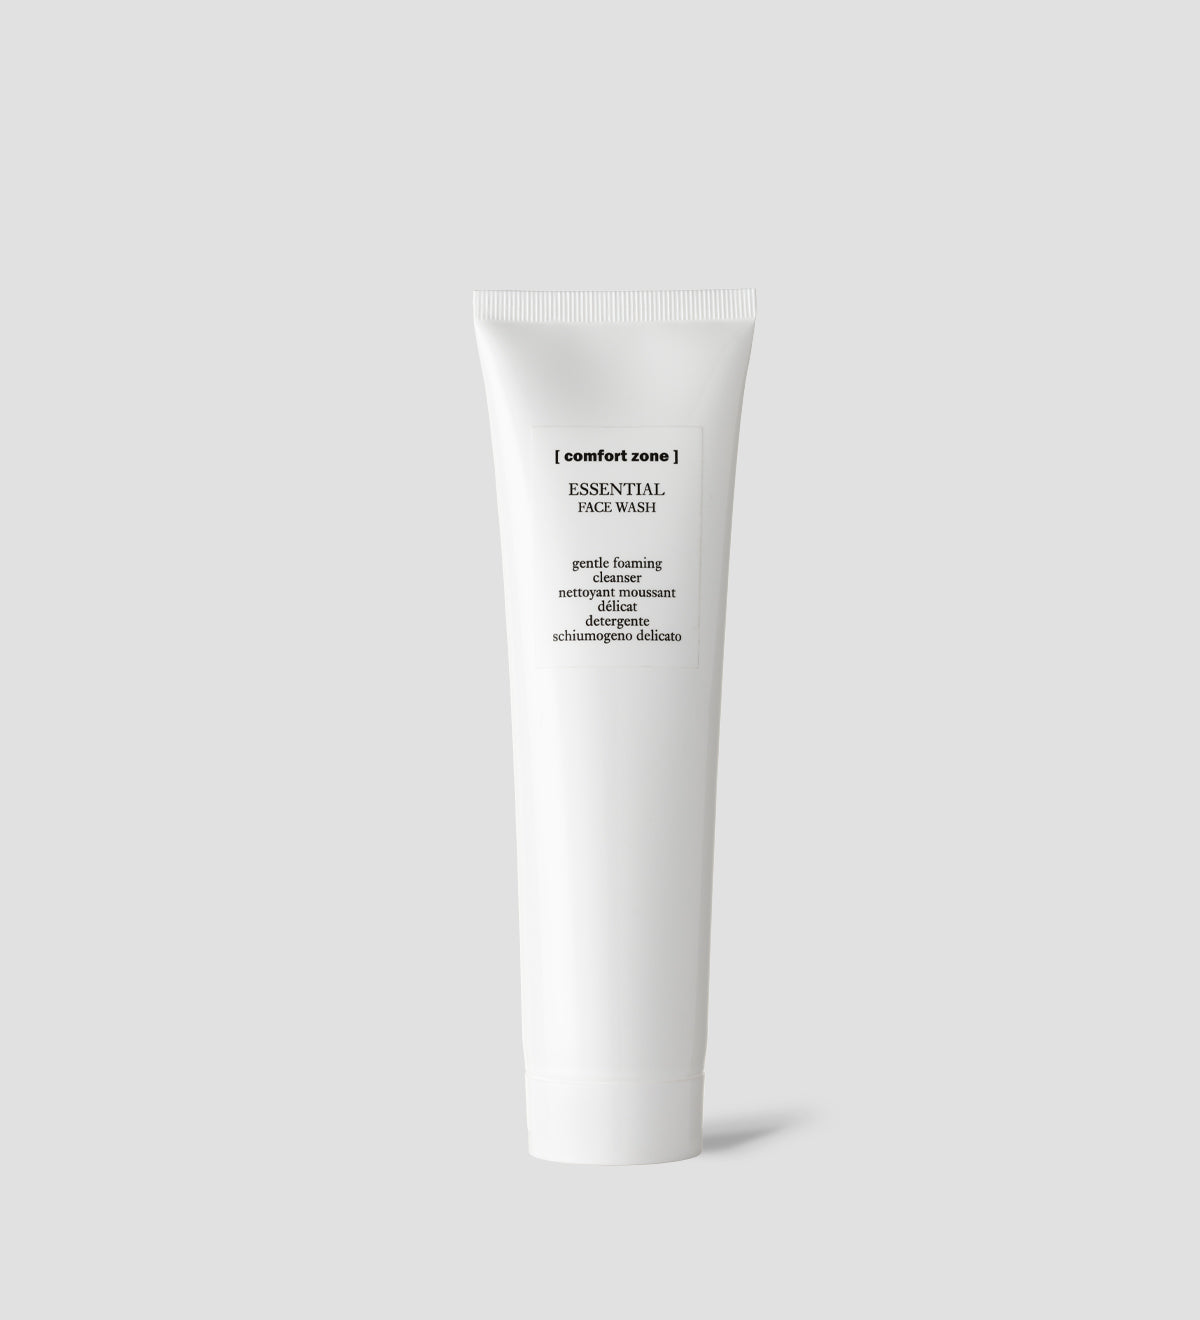 Comfort Zone: ESSENTIAL FACE WASH  Gentle foaming cleanser -